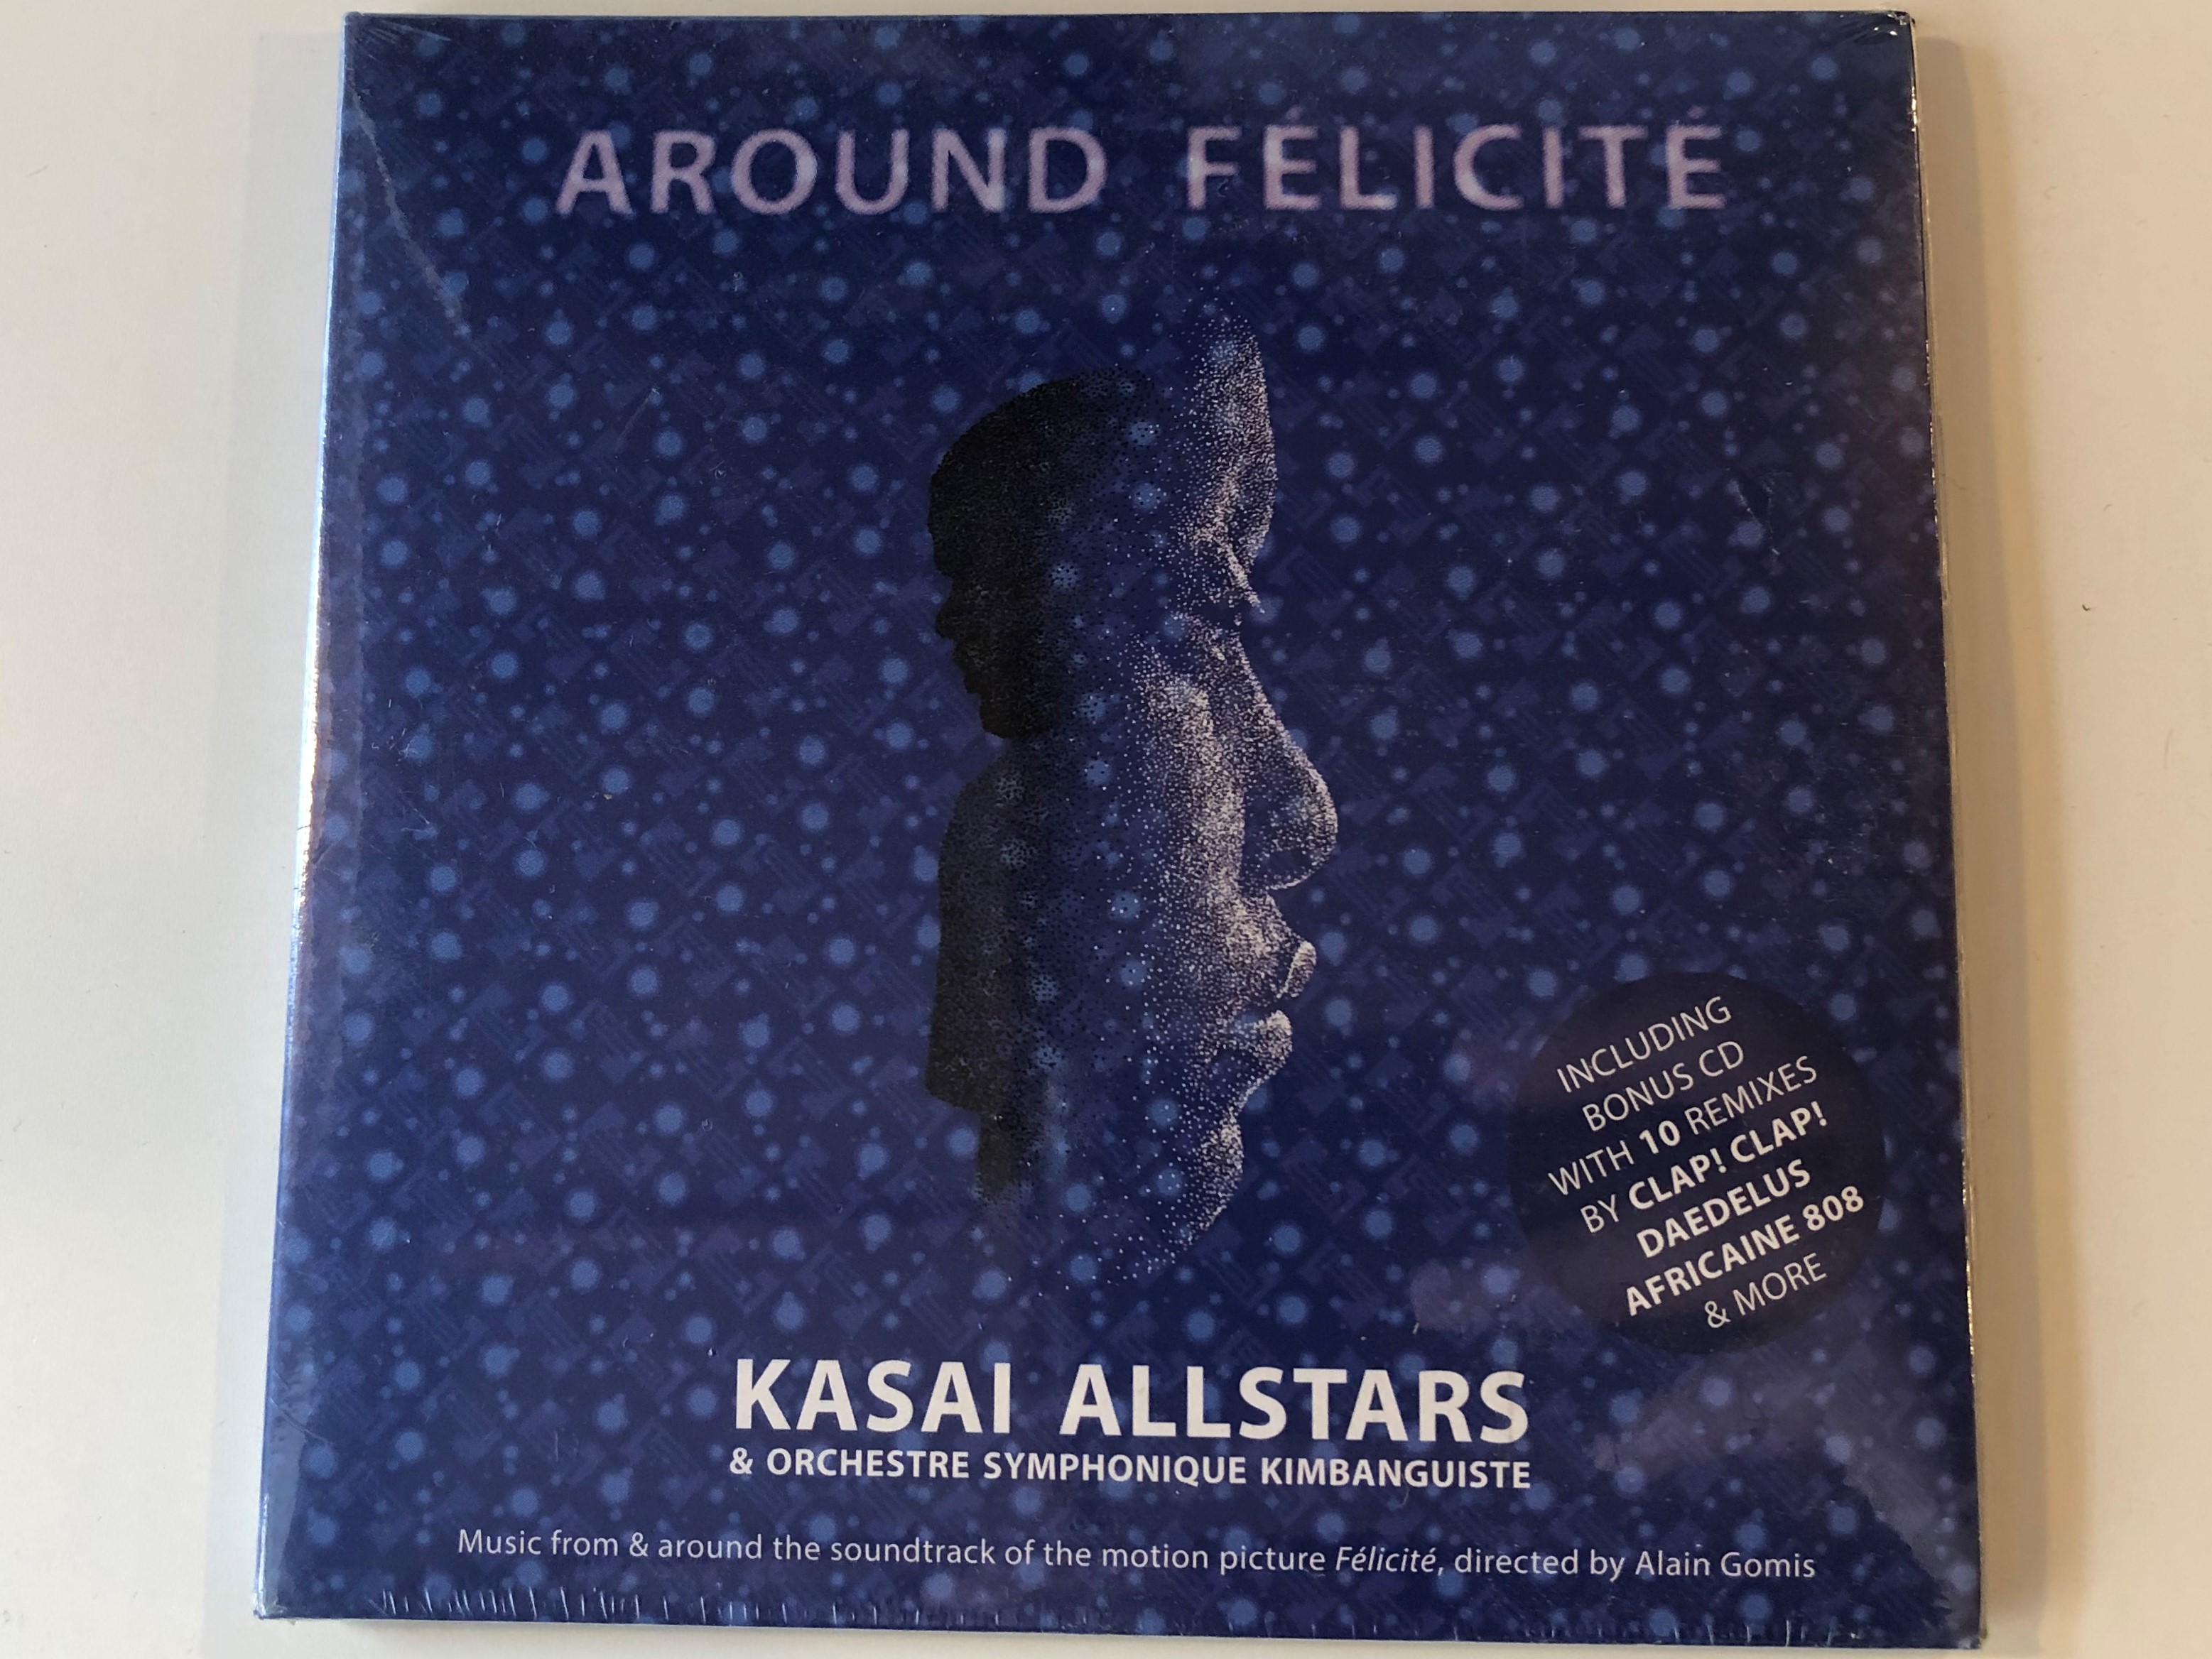 around-f-licit-kasai-allstars-orchestre-symphonique-kimbanguiste-music-from-around-the-soundtrack-of-the-motion-picture-felicite-directed-by-alain-gomis-crammed-discs-audio-cd-2017-c-1-.jpg